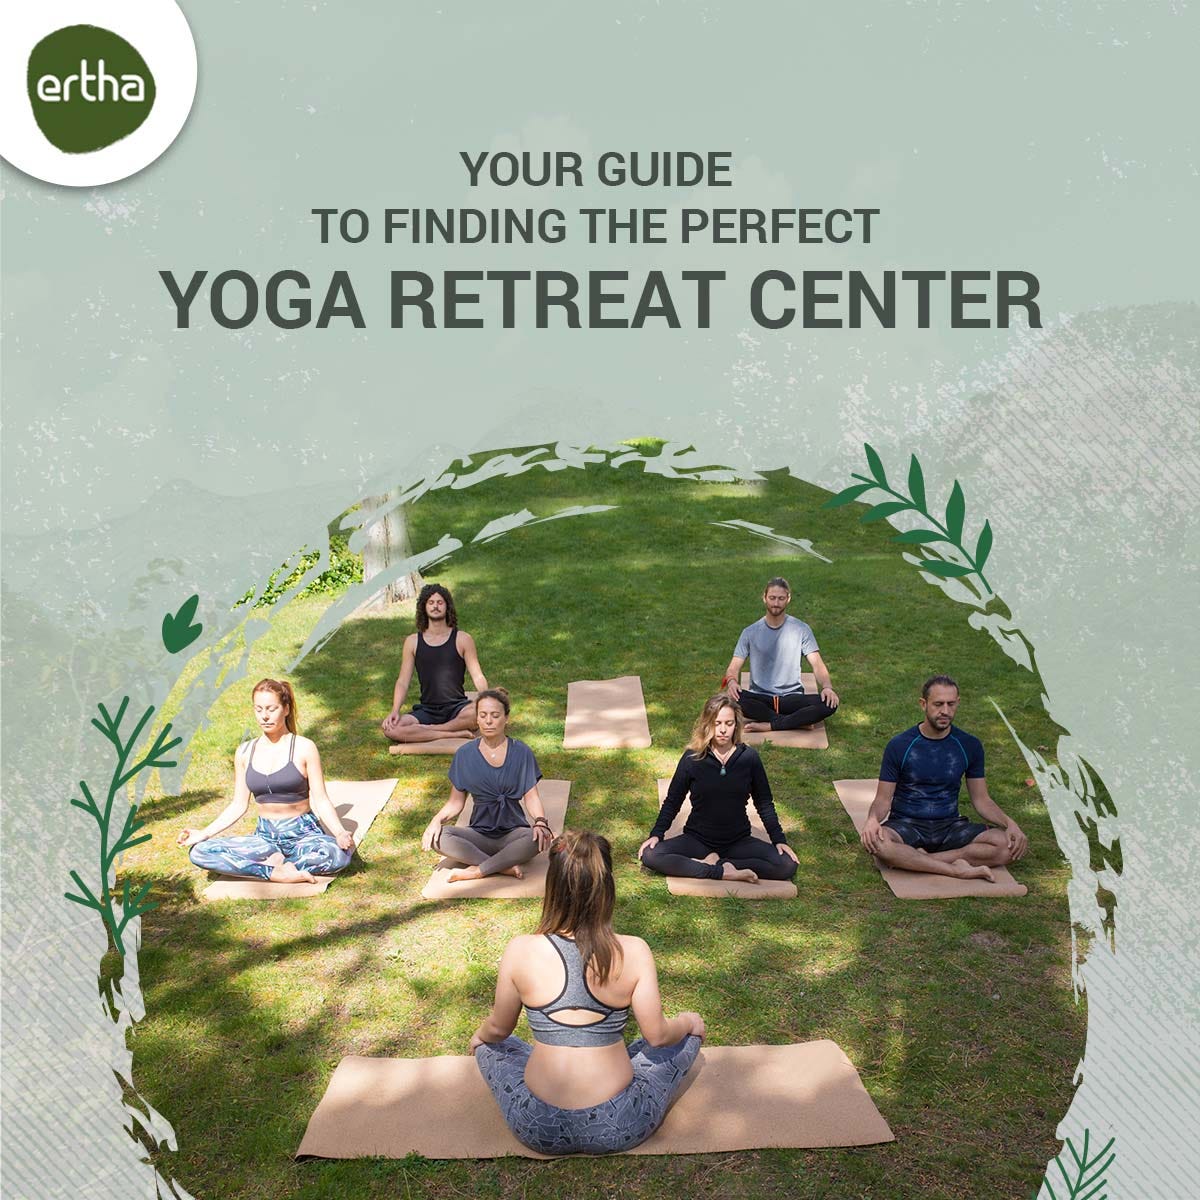 Yoga Retreat Bliss: Your Guide to Finding the Perfect Yoga Retreat Center, by Ertharetreat